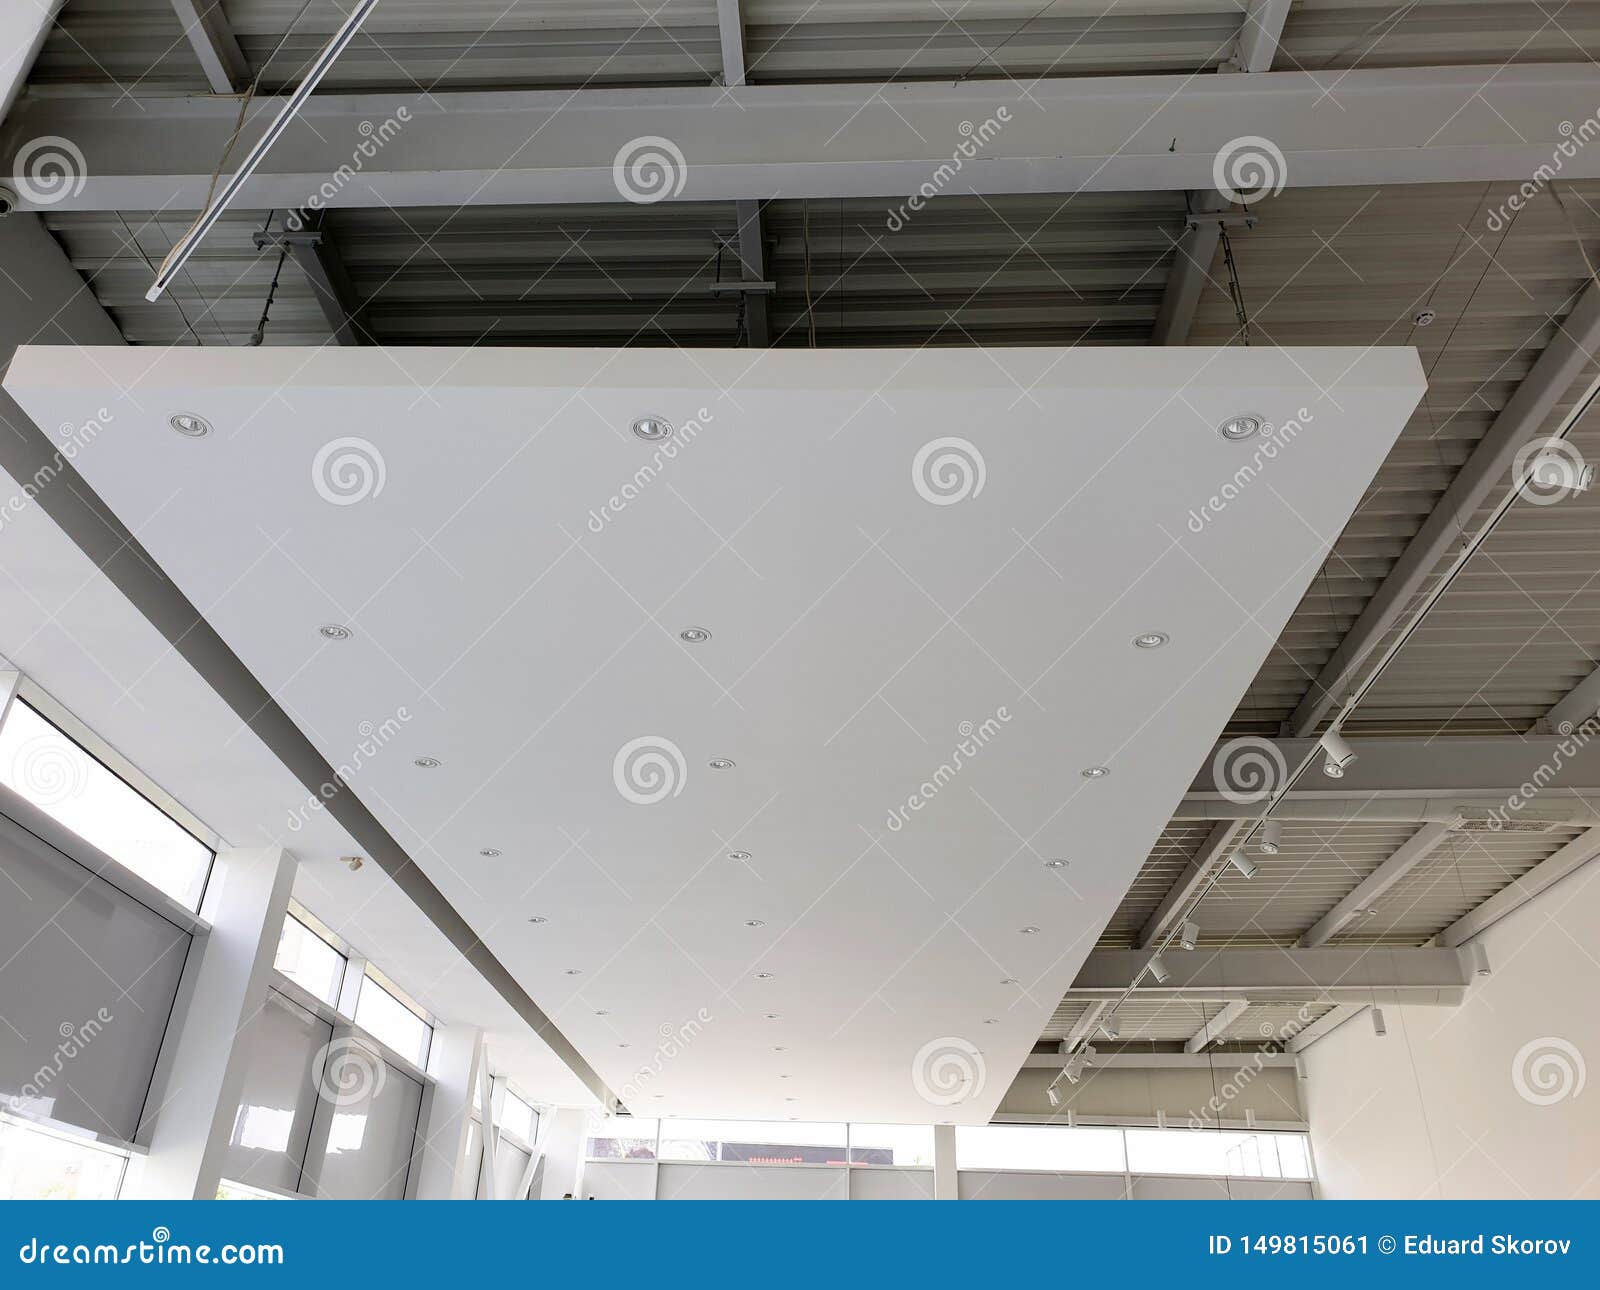 white suspended ceiling with led spotlights. showroom